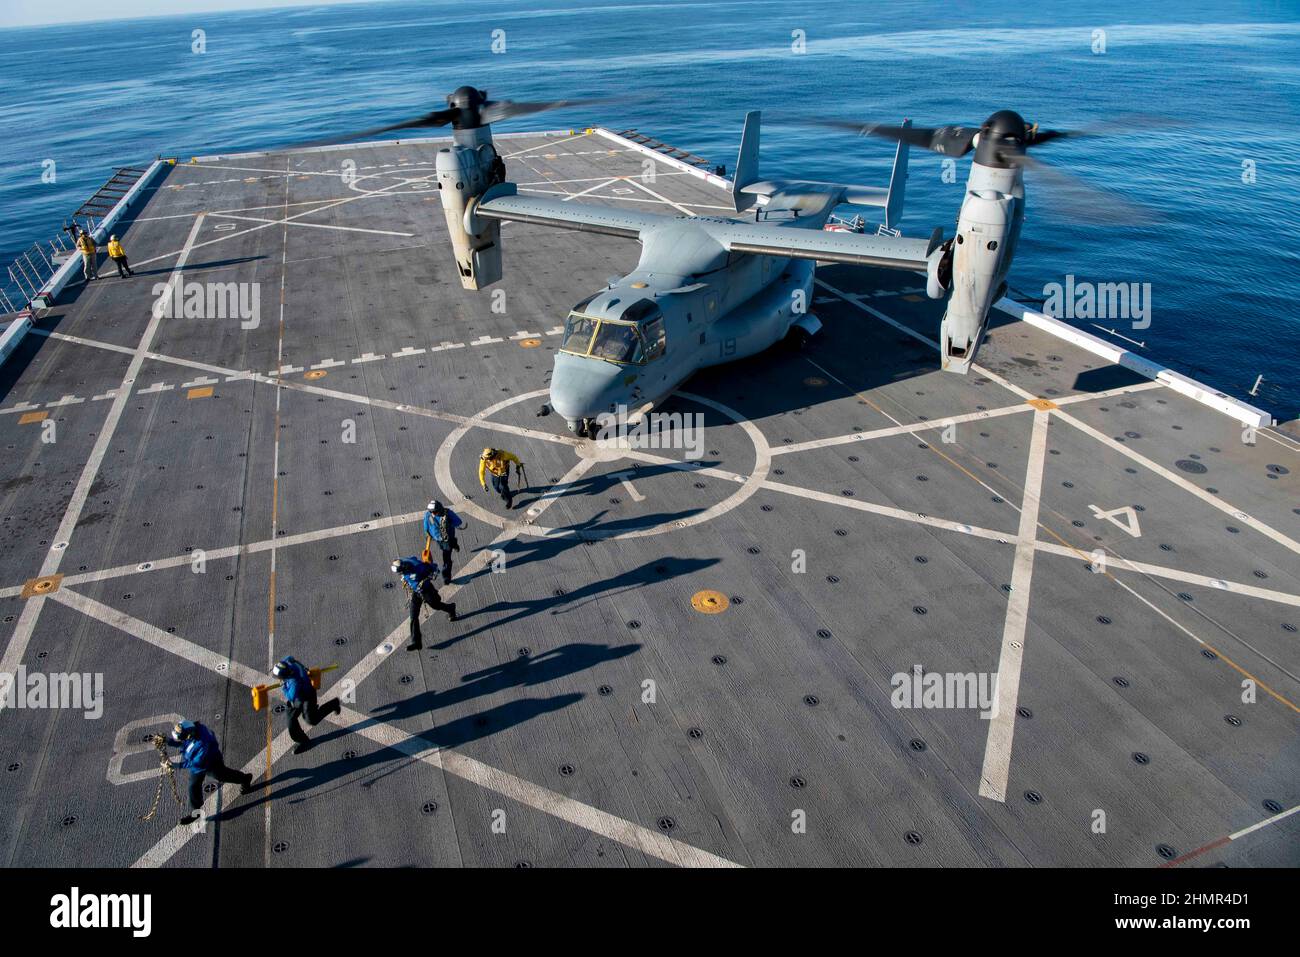 20220203-N-WY048-1201    PACIFIC OCEAN (Feb. 3, 2022) – Sailors assigned to amphibious transport dock ship USS Anchorage (LPD 23) chock and chain an MV-22 Osprey, assigned to Marine Medium Tiltrotor Squadron (VMM) 362, on the ship’s flight deck, Feb. 3. Anchorage is underway conducting routine operations in U.S. 3rd Fleet. (U.S. Navy Photo by Mass Communication Specialist 2nd Class Hector Carrera) Stock Photo